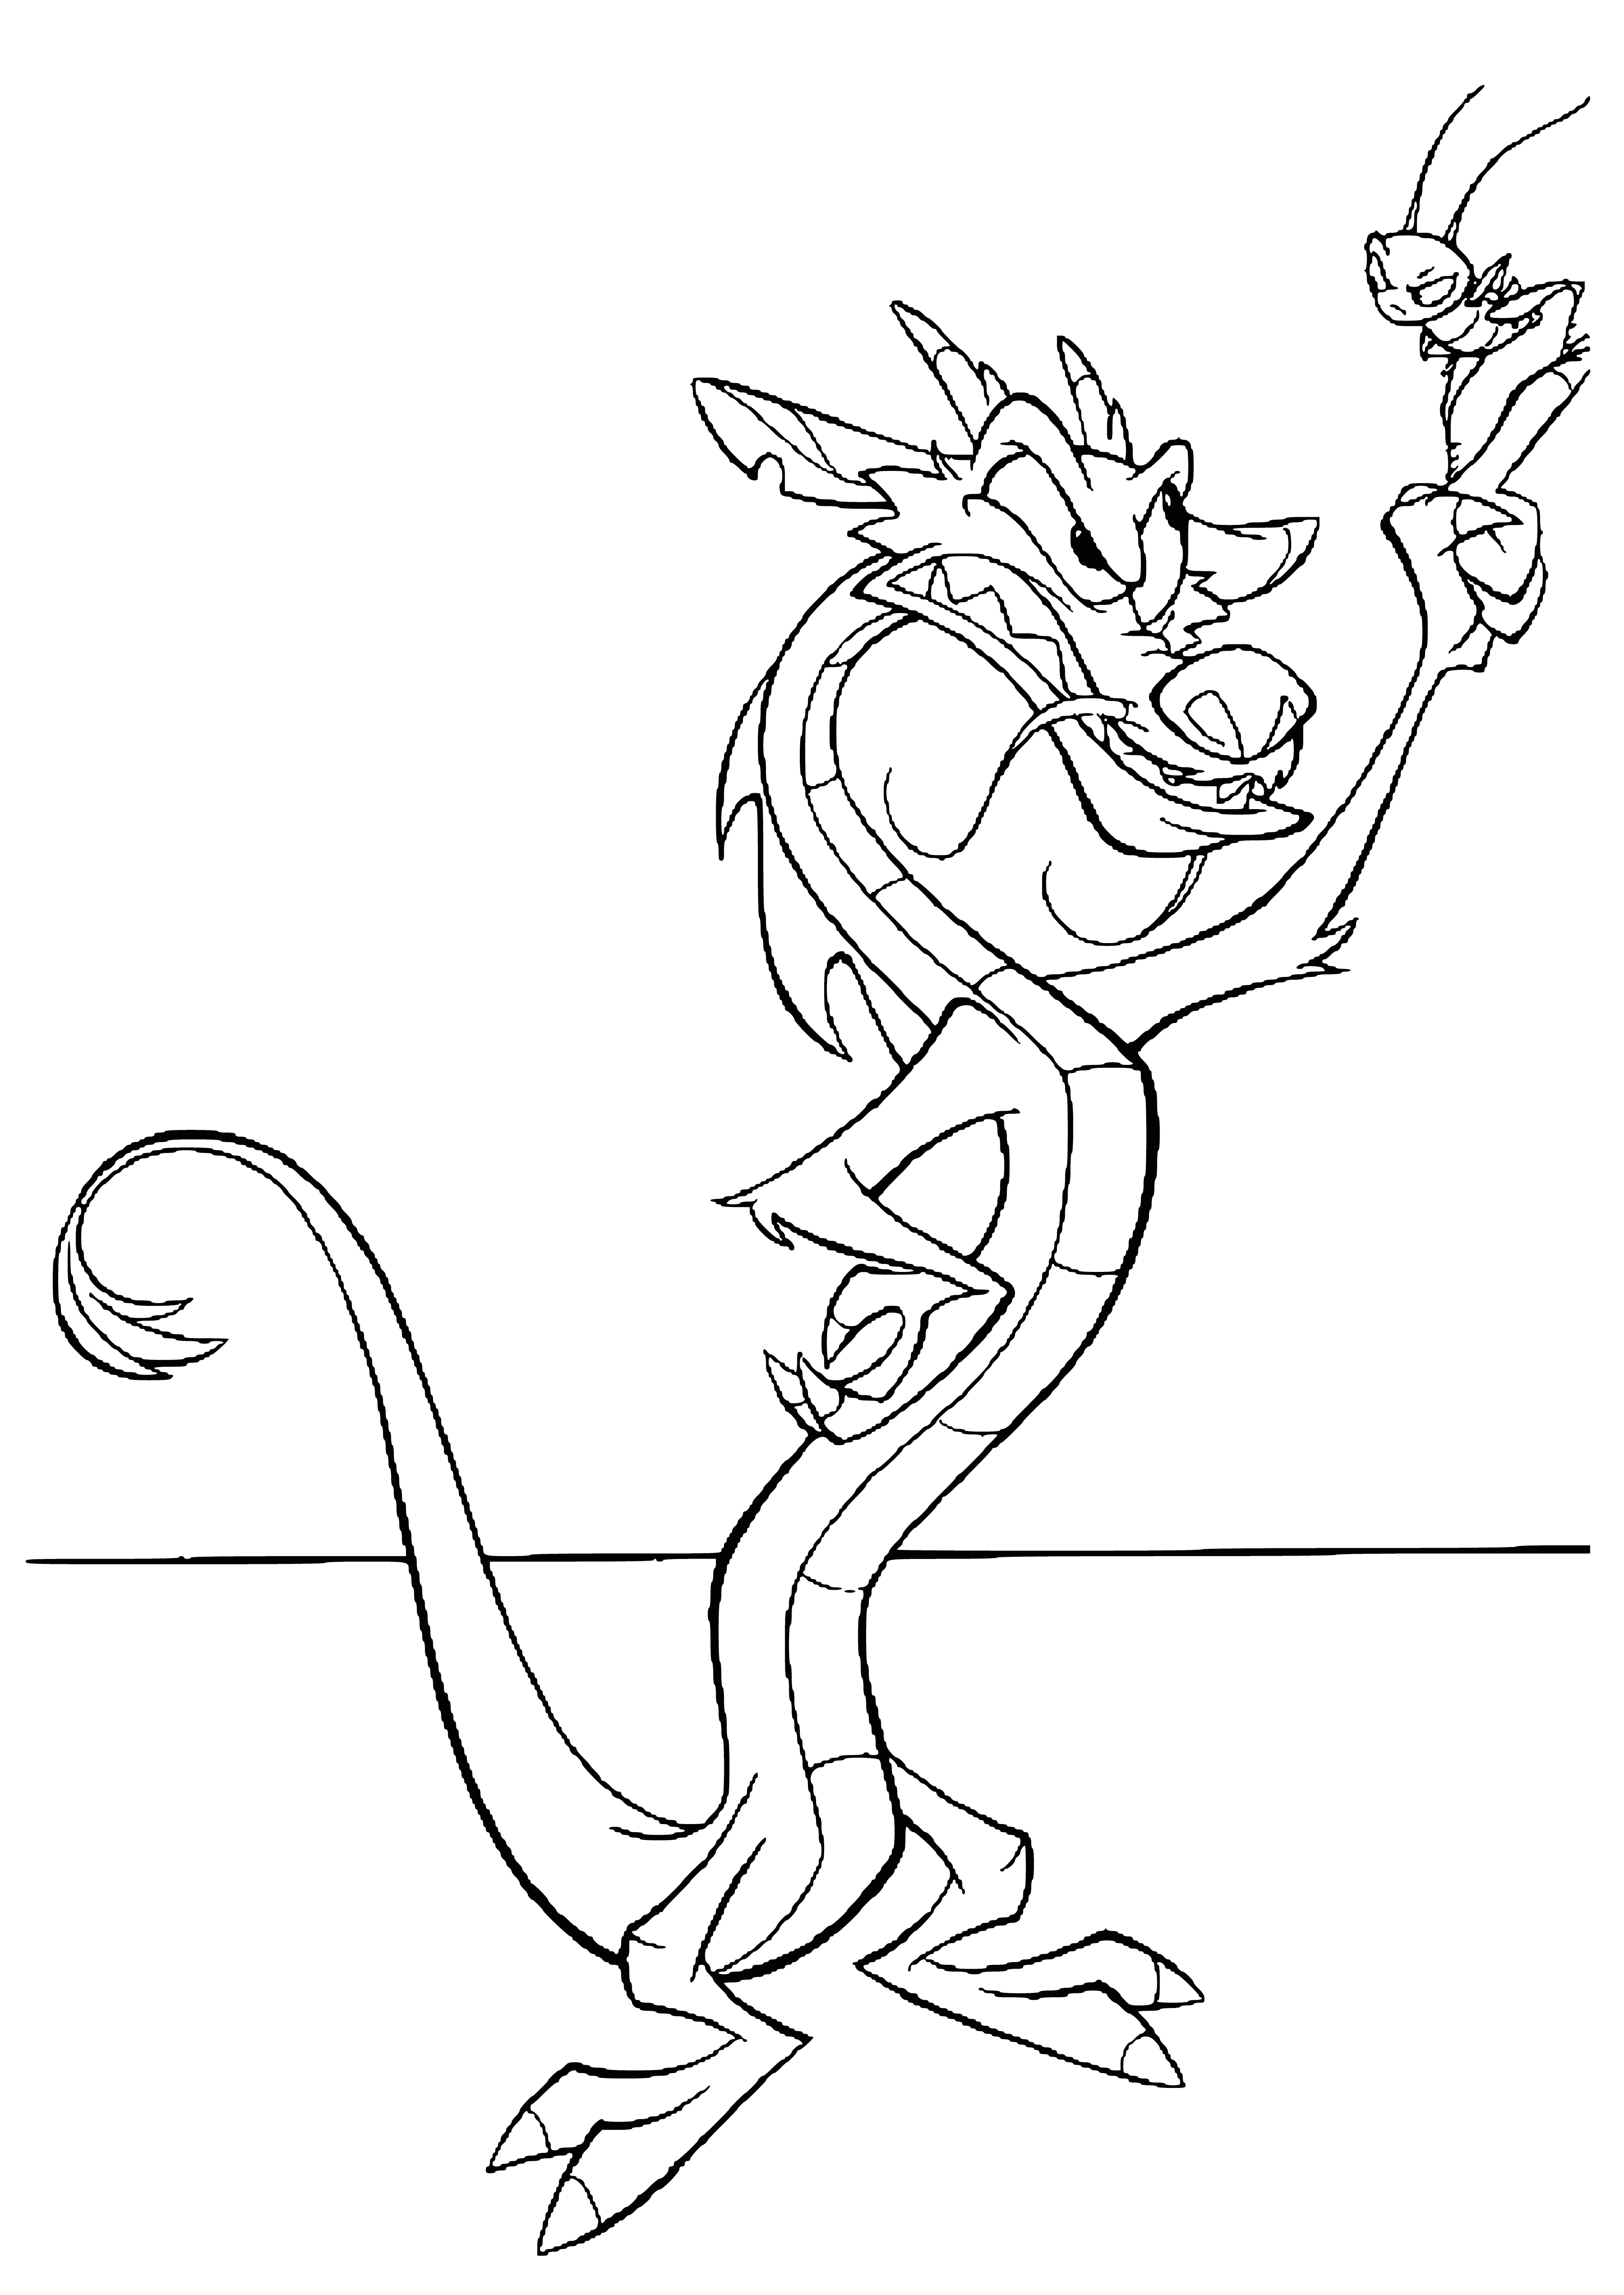 coloring page: A large orange dragon & small brown cricket interact on the coloring page. Cricket stands on dragon's head & is talking to it.